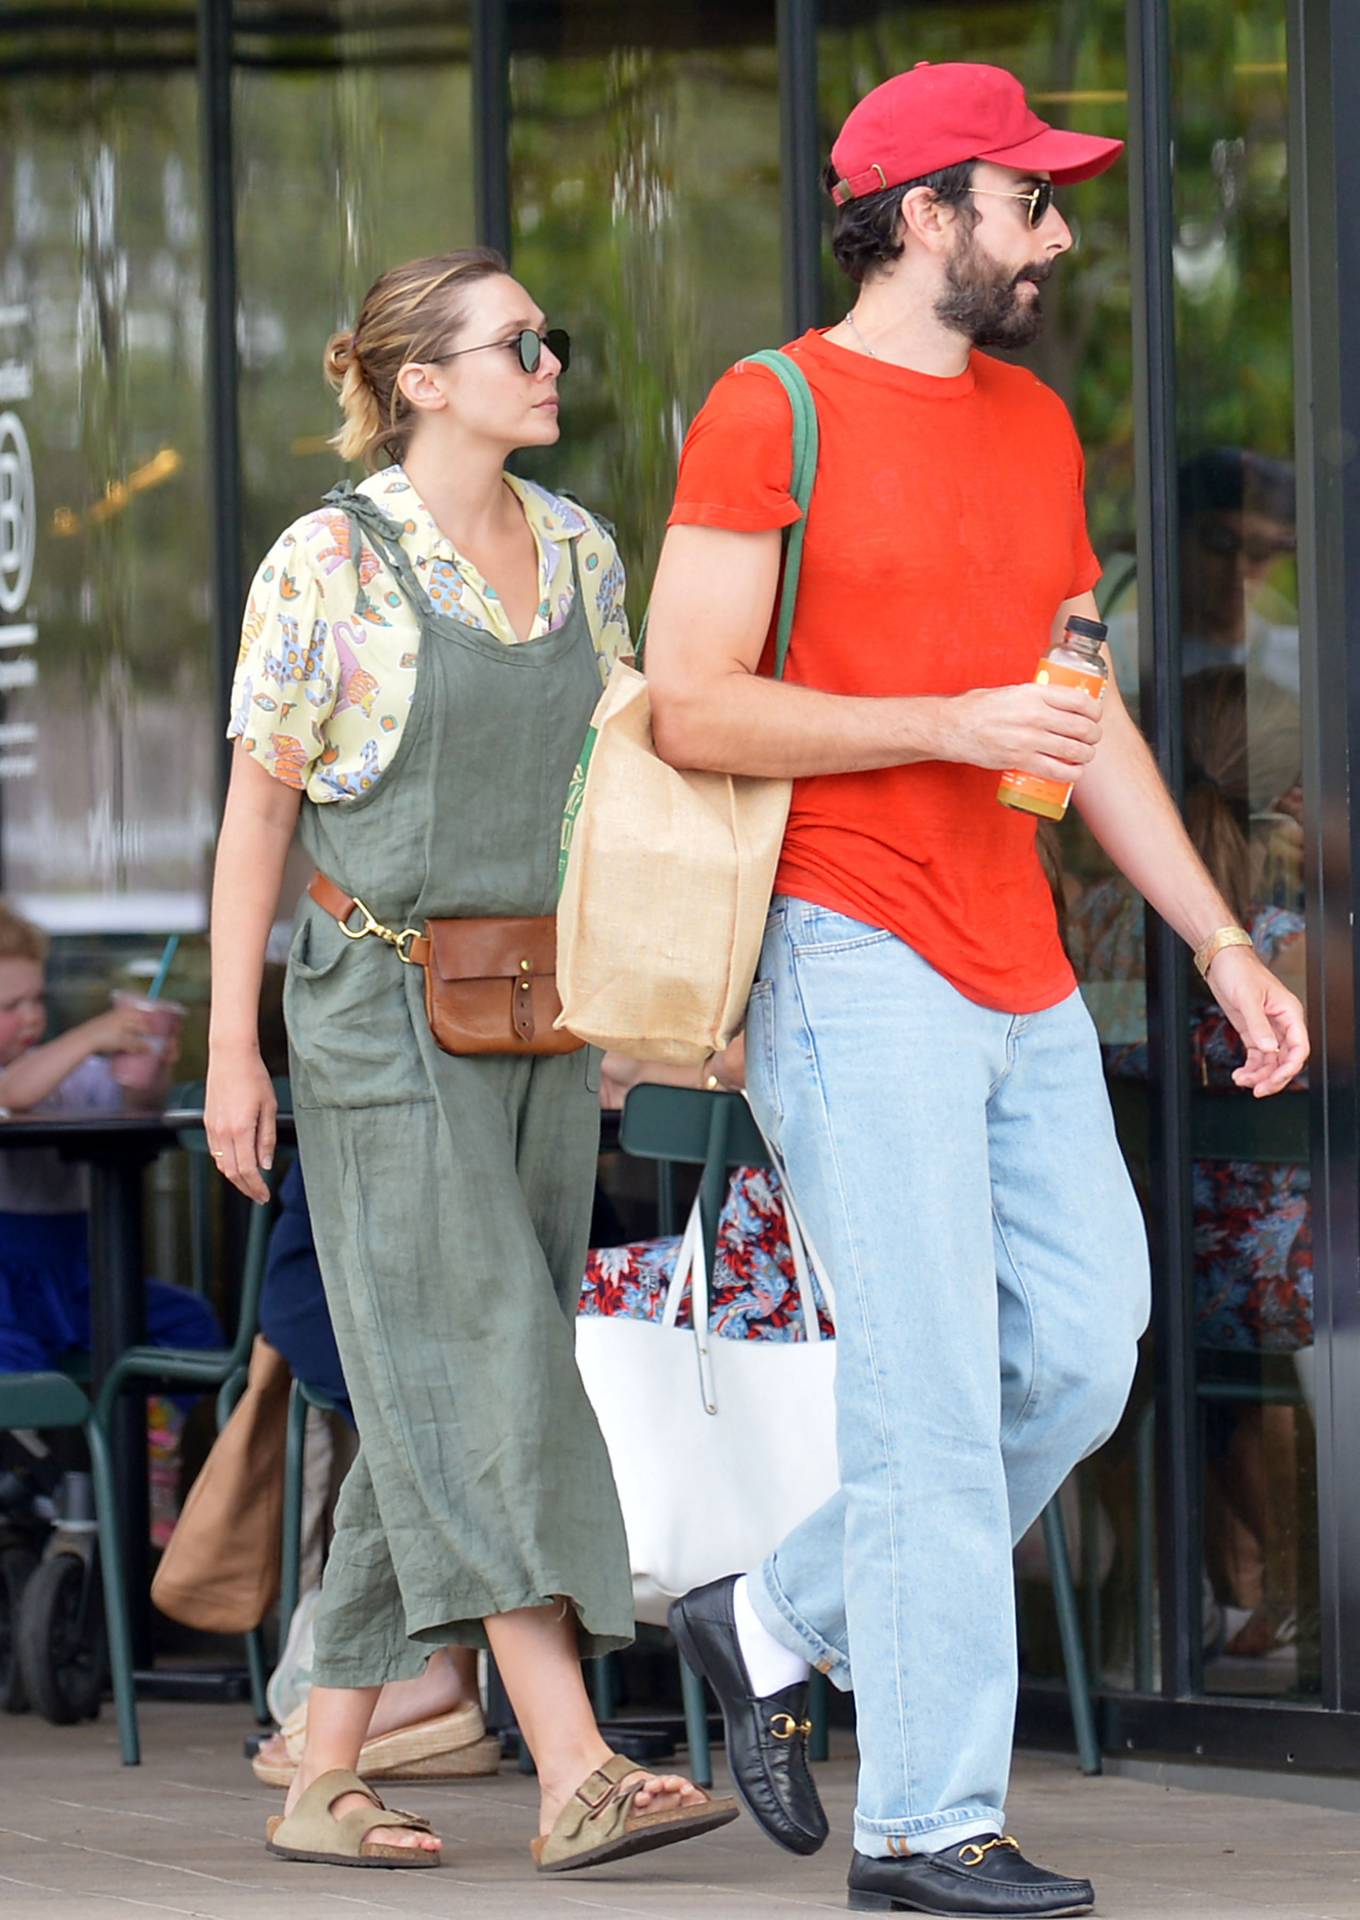 Elizabeth Olsen - Shopping for groceries with husband Robbie Arnet at Whole Foods in LA